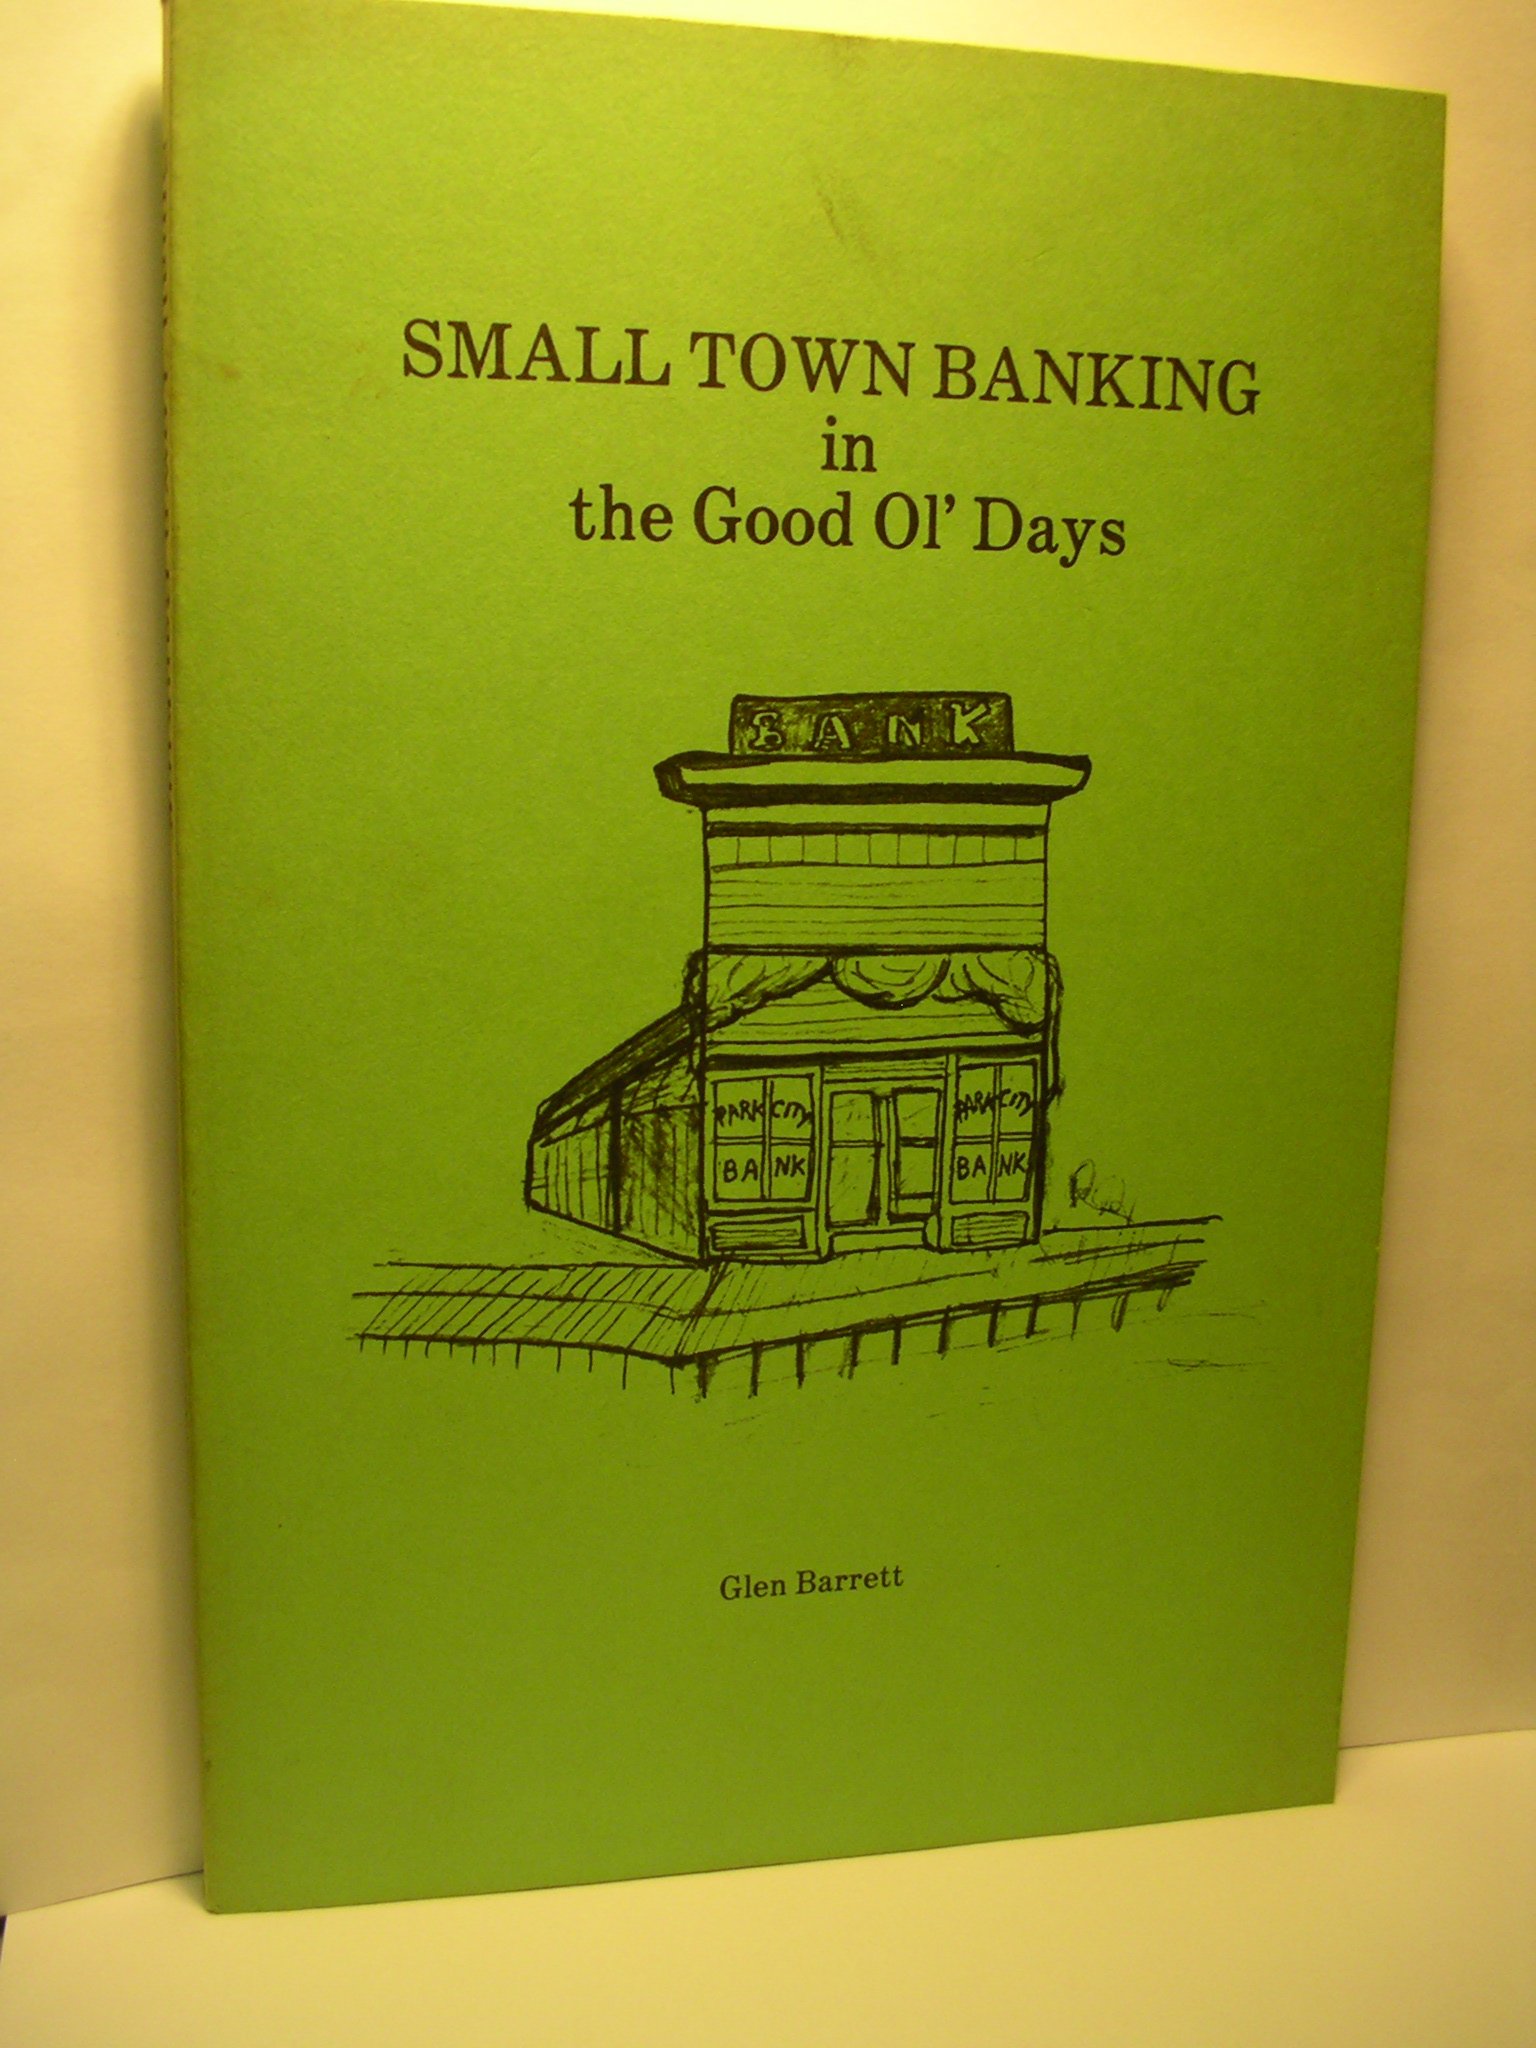 Small town banking in the good ol' days (book cover)